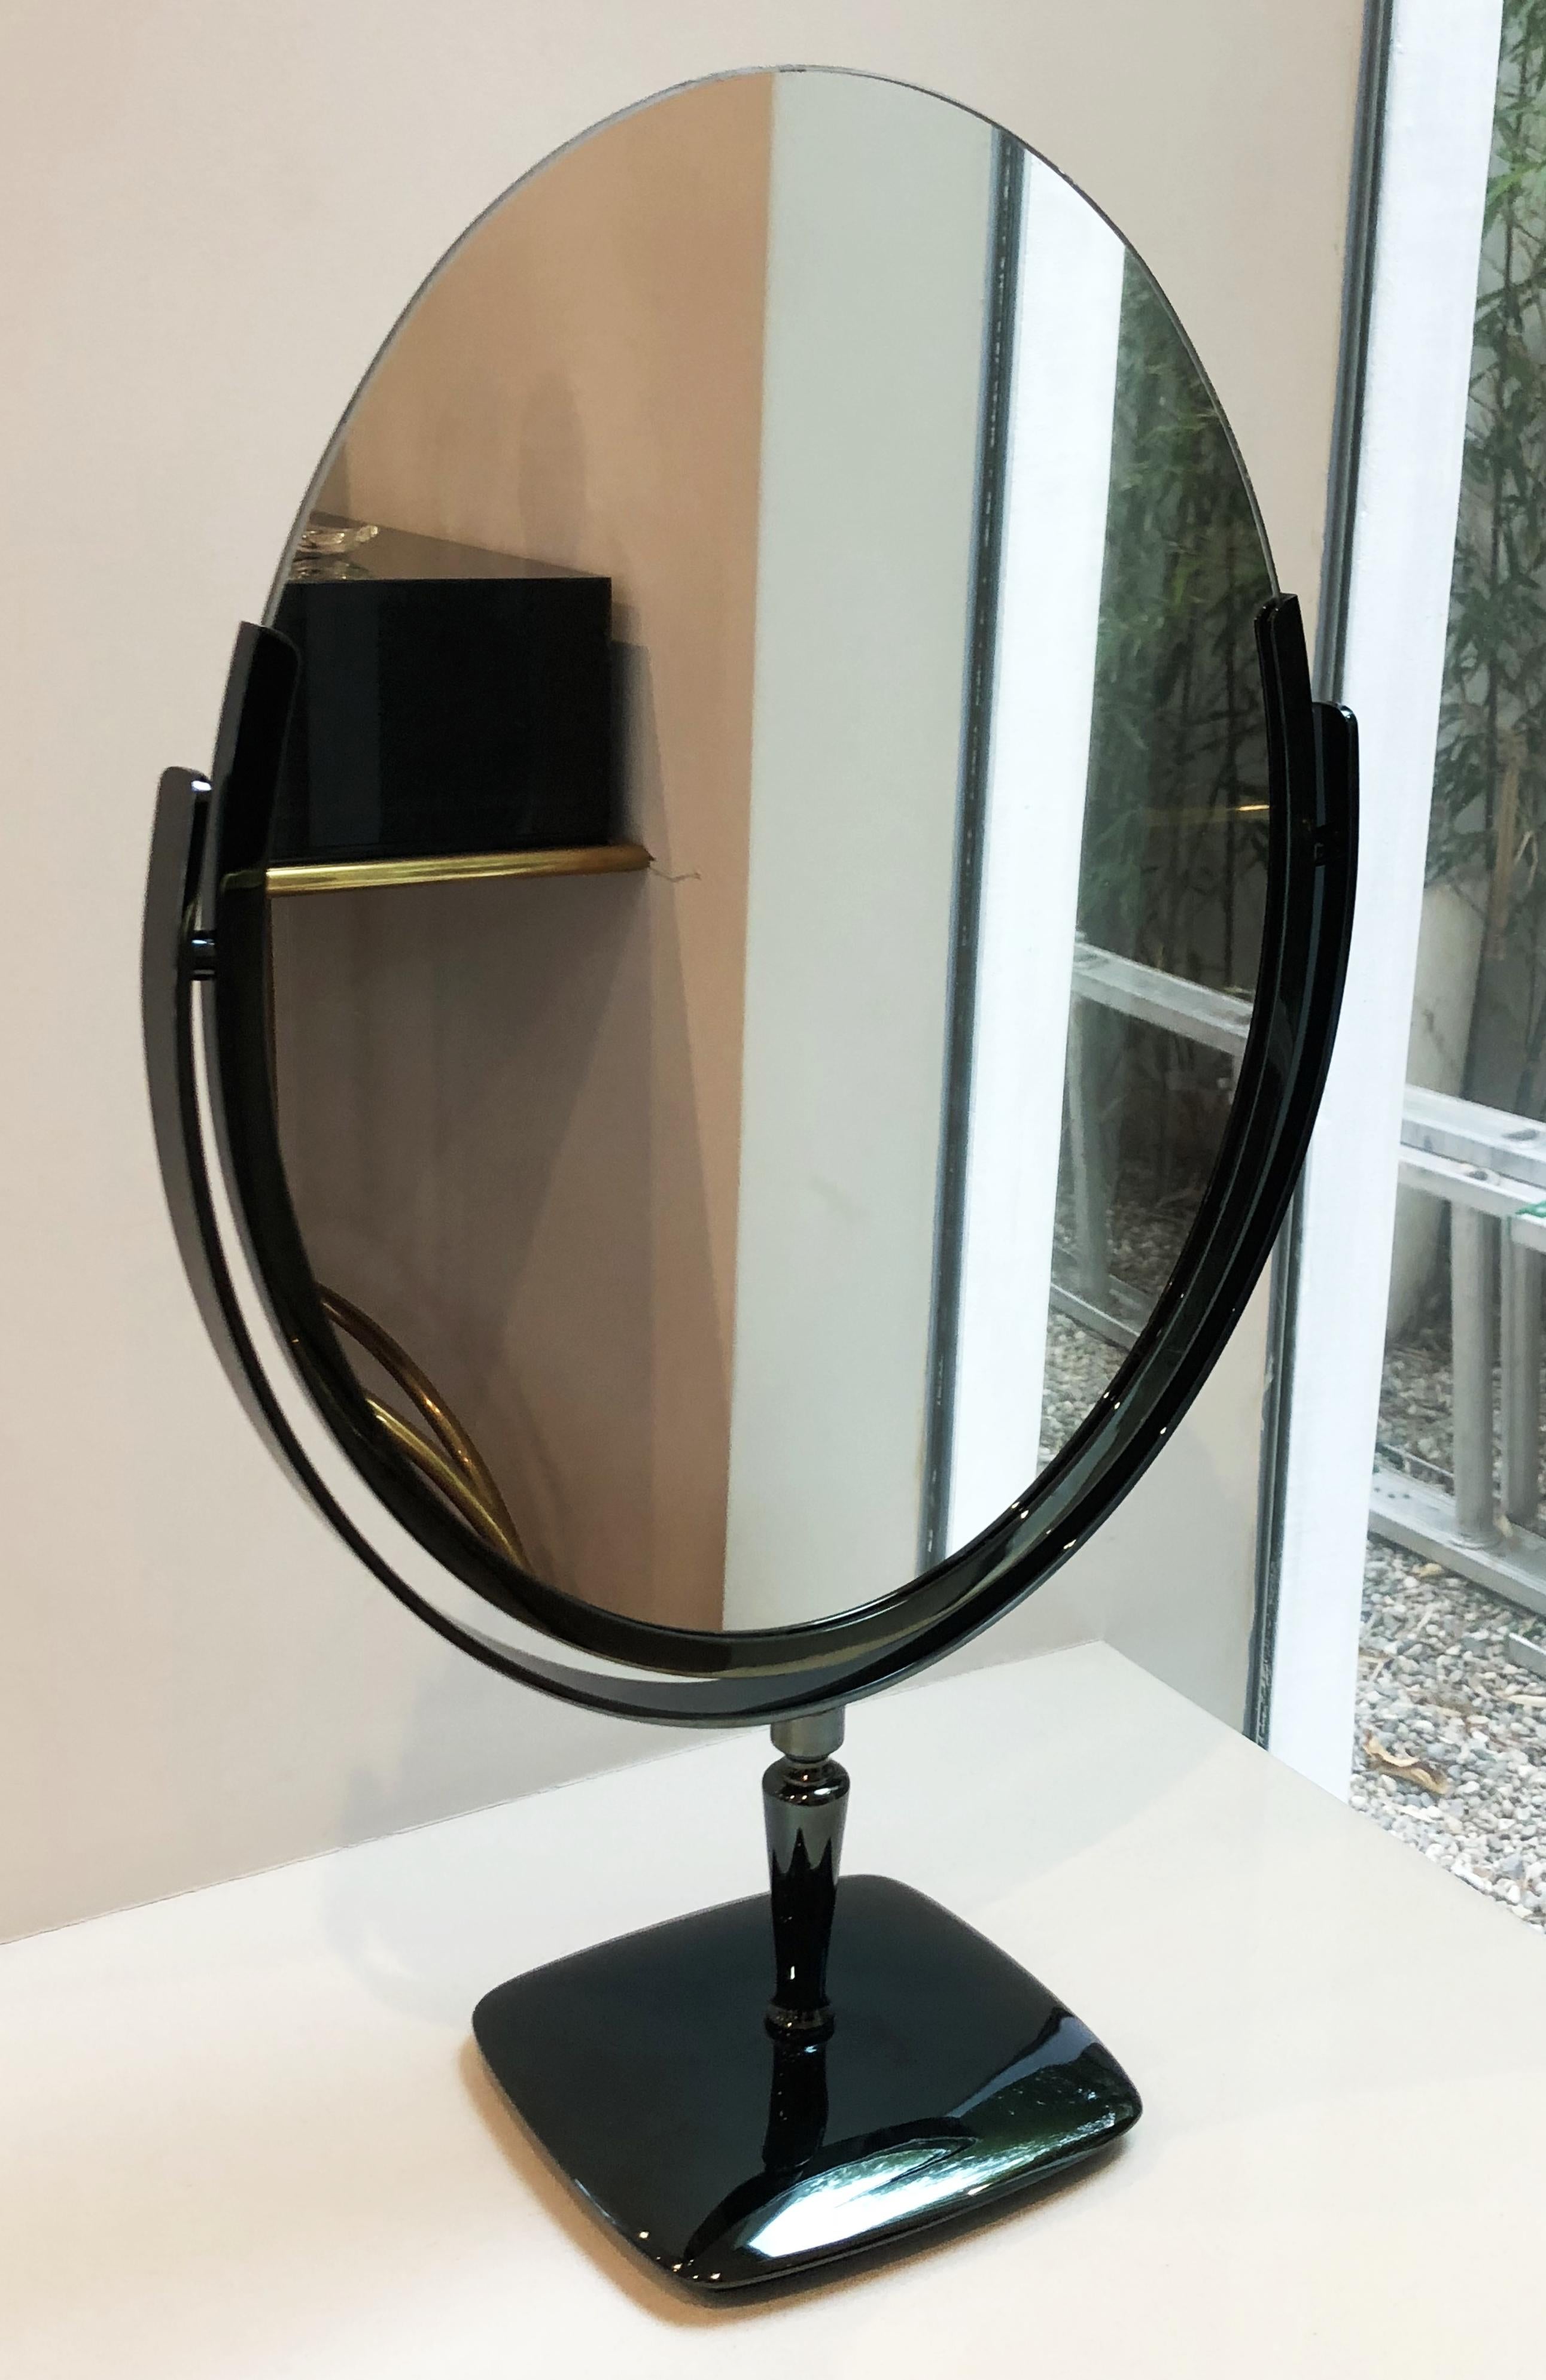 Large and beautiful oval mirror designed and manufactured by Charles Hollis Jones in the 1960s.
The mirror has a beautiful black nickel finished frame and base, the mirror is double sided and it can be flipped to be used on either